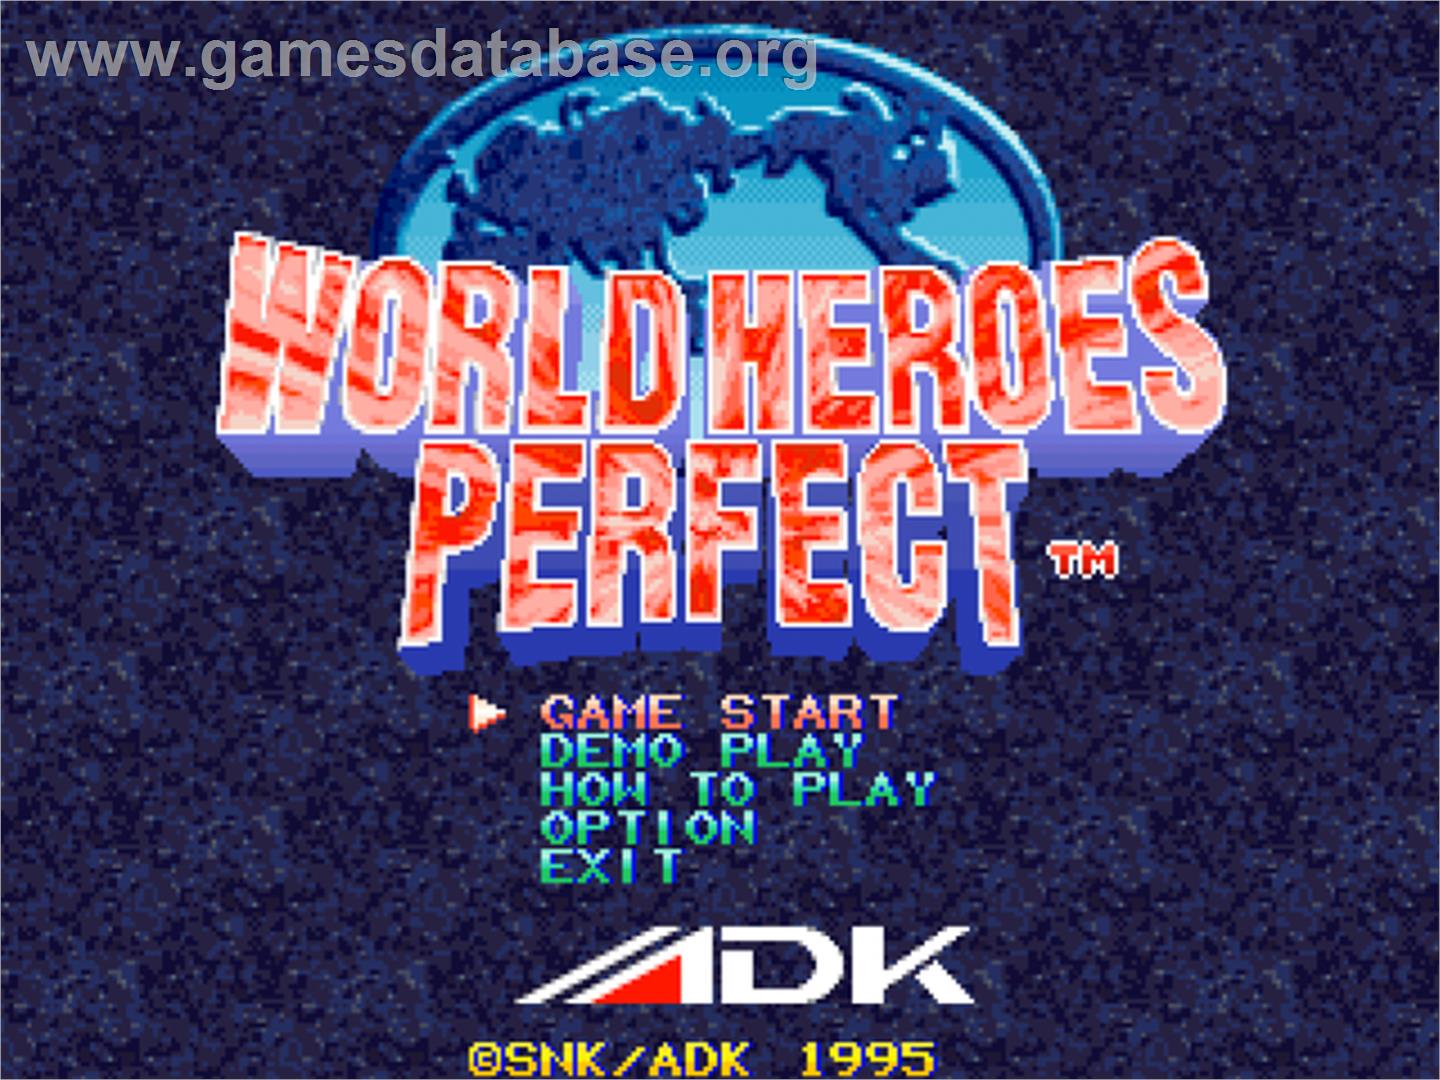 World Heroes Perfect: The Ultimate Heroes - SNK Neo-Geo CD - Artwork - Title Screen